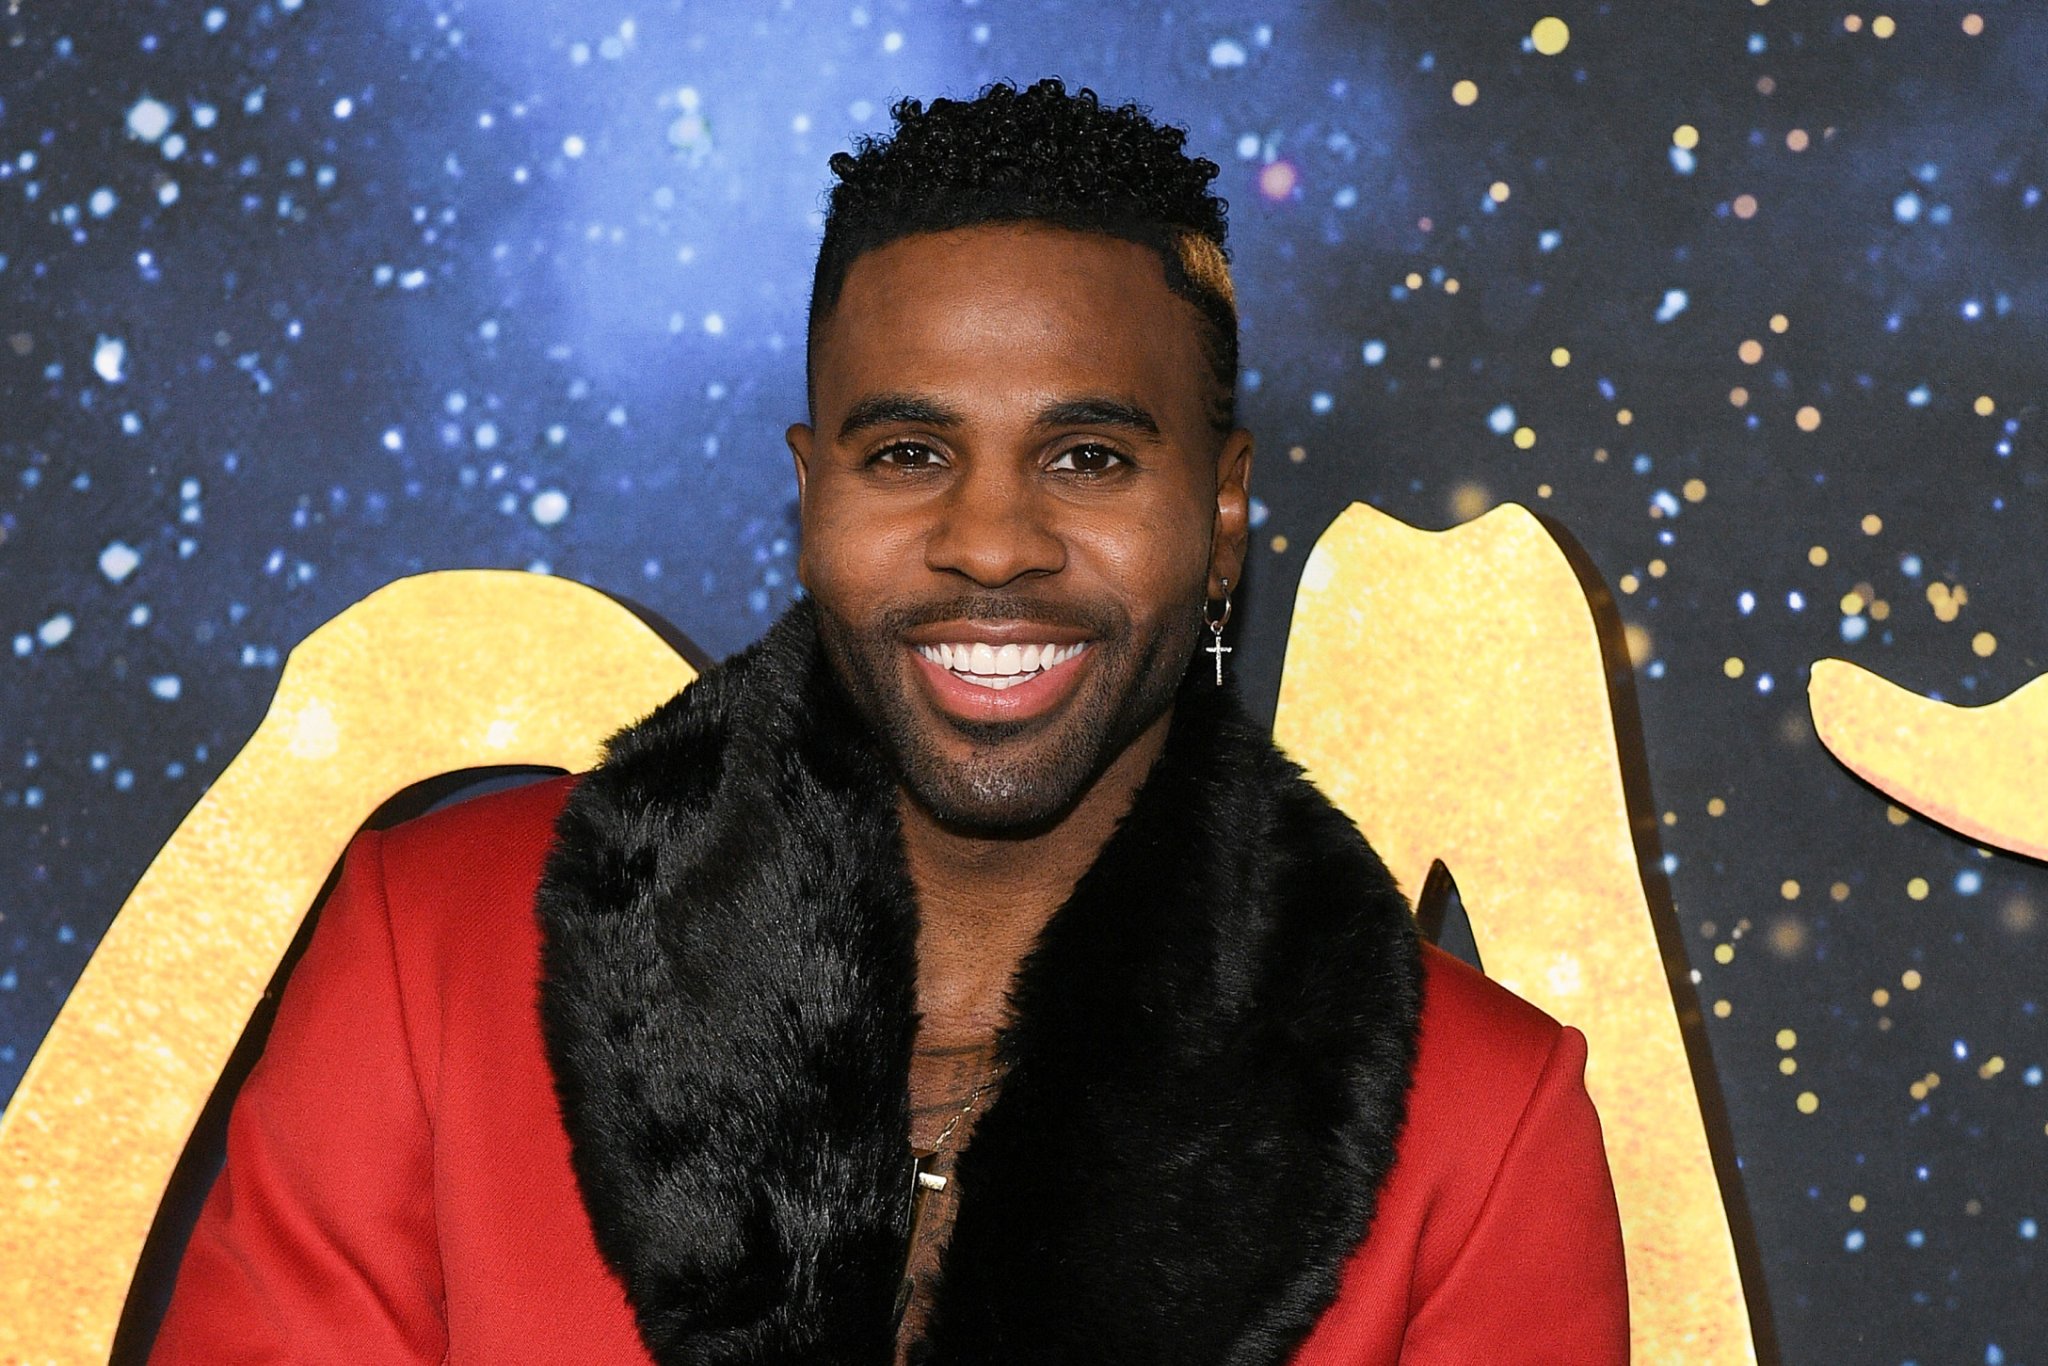 Jason Derulo Goes 'Everywhere' With His Baby Son Strapped to His Chest in Hilarious Video